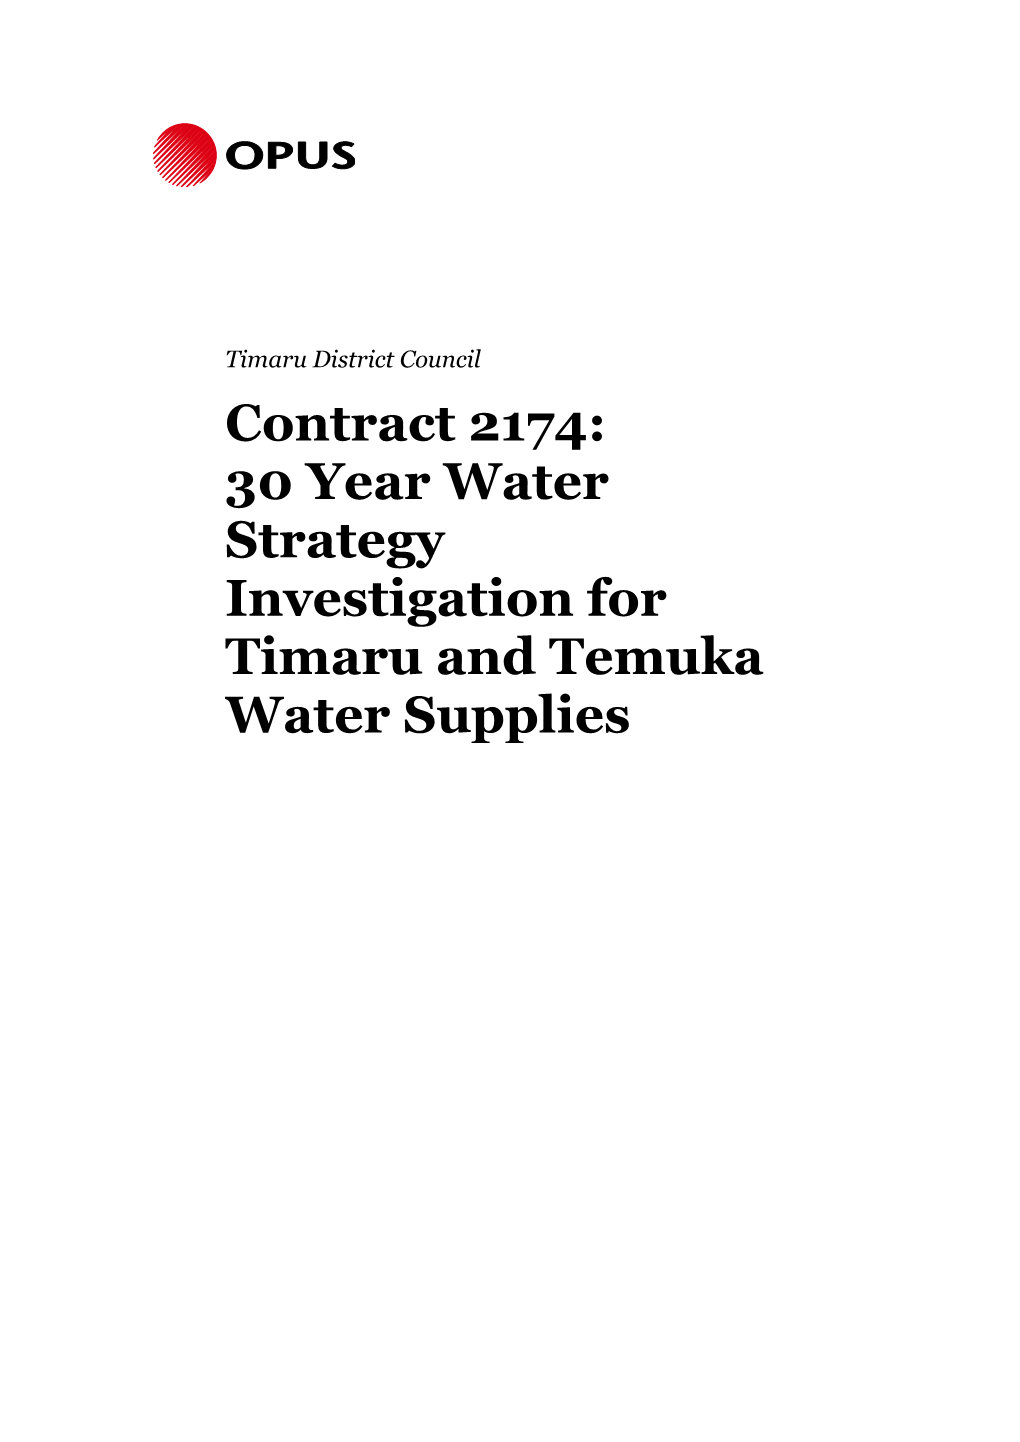 30 Year Water Strategy Investigation for Timaru and Temuka Water Supplies I